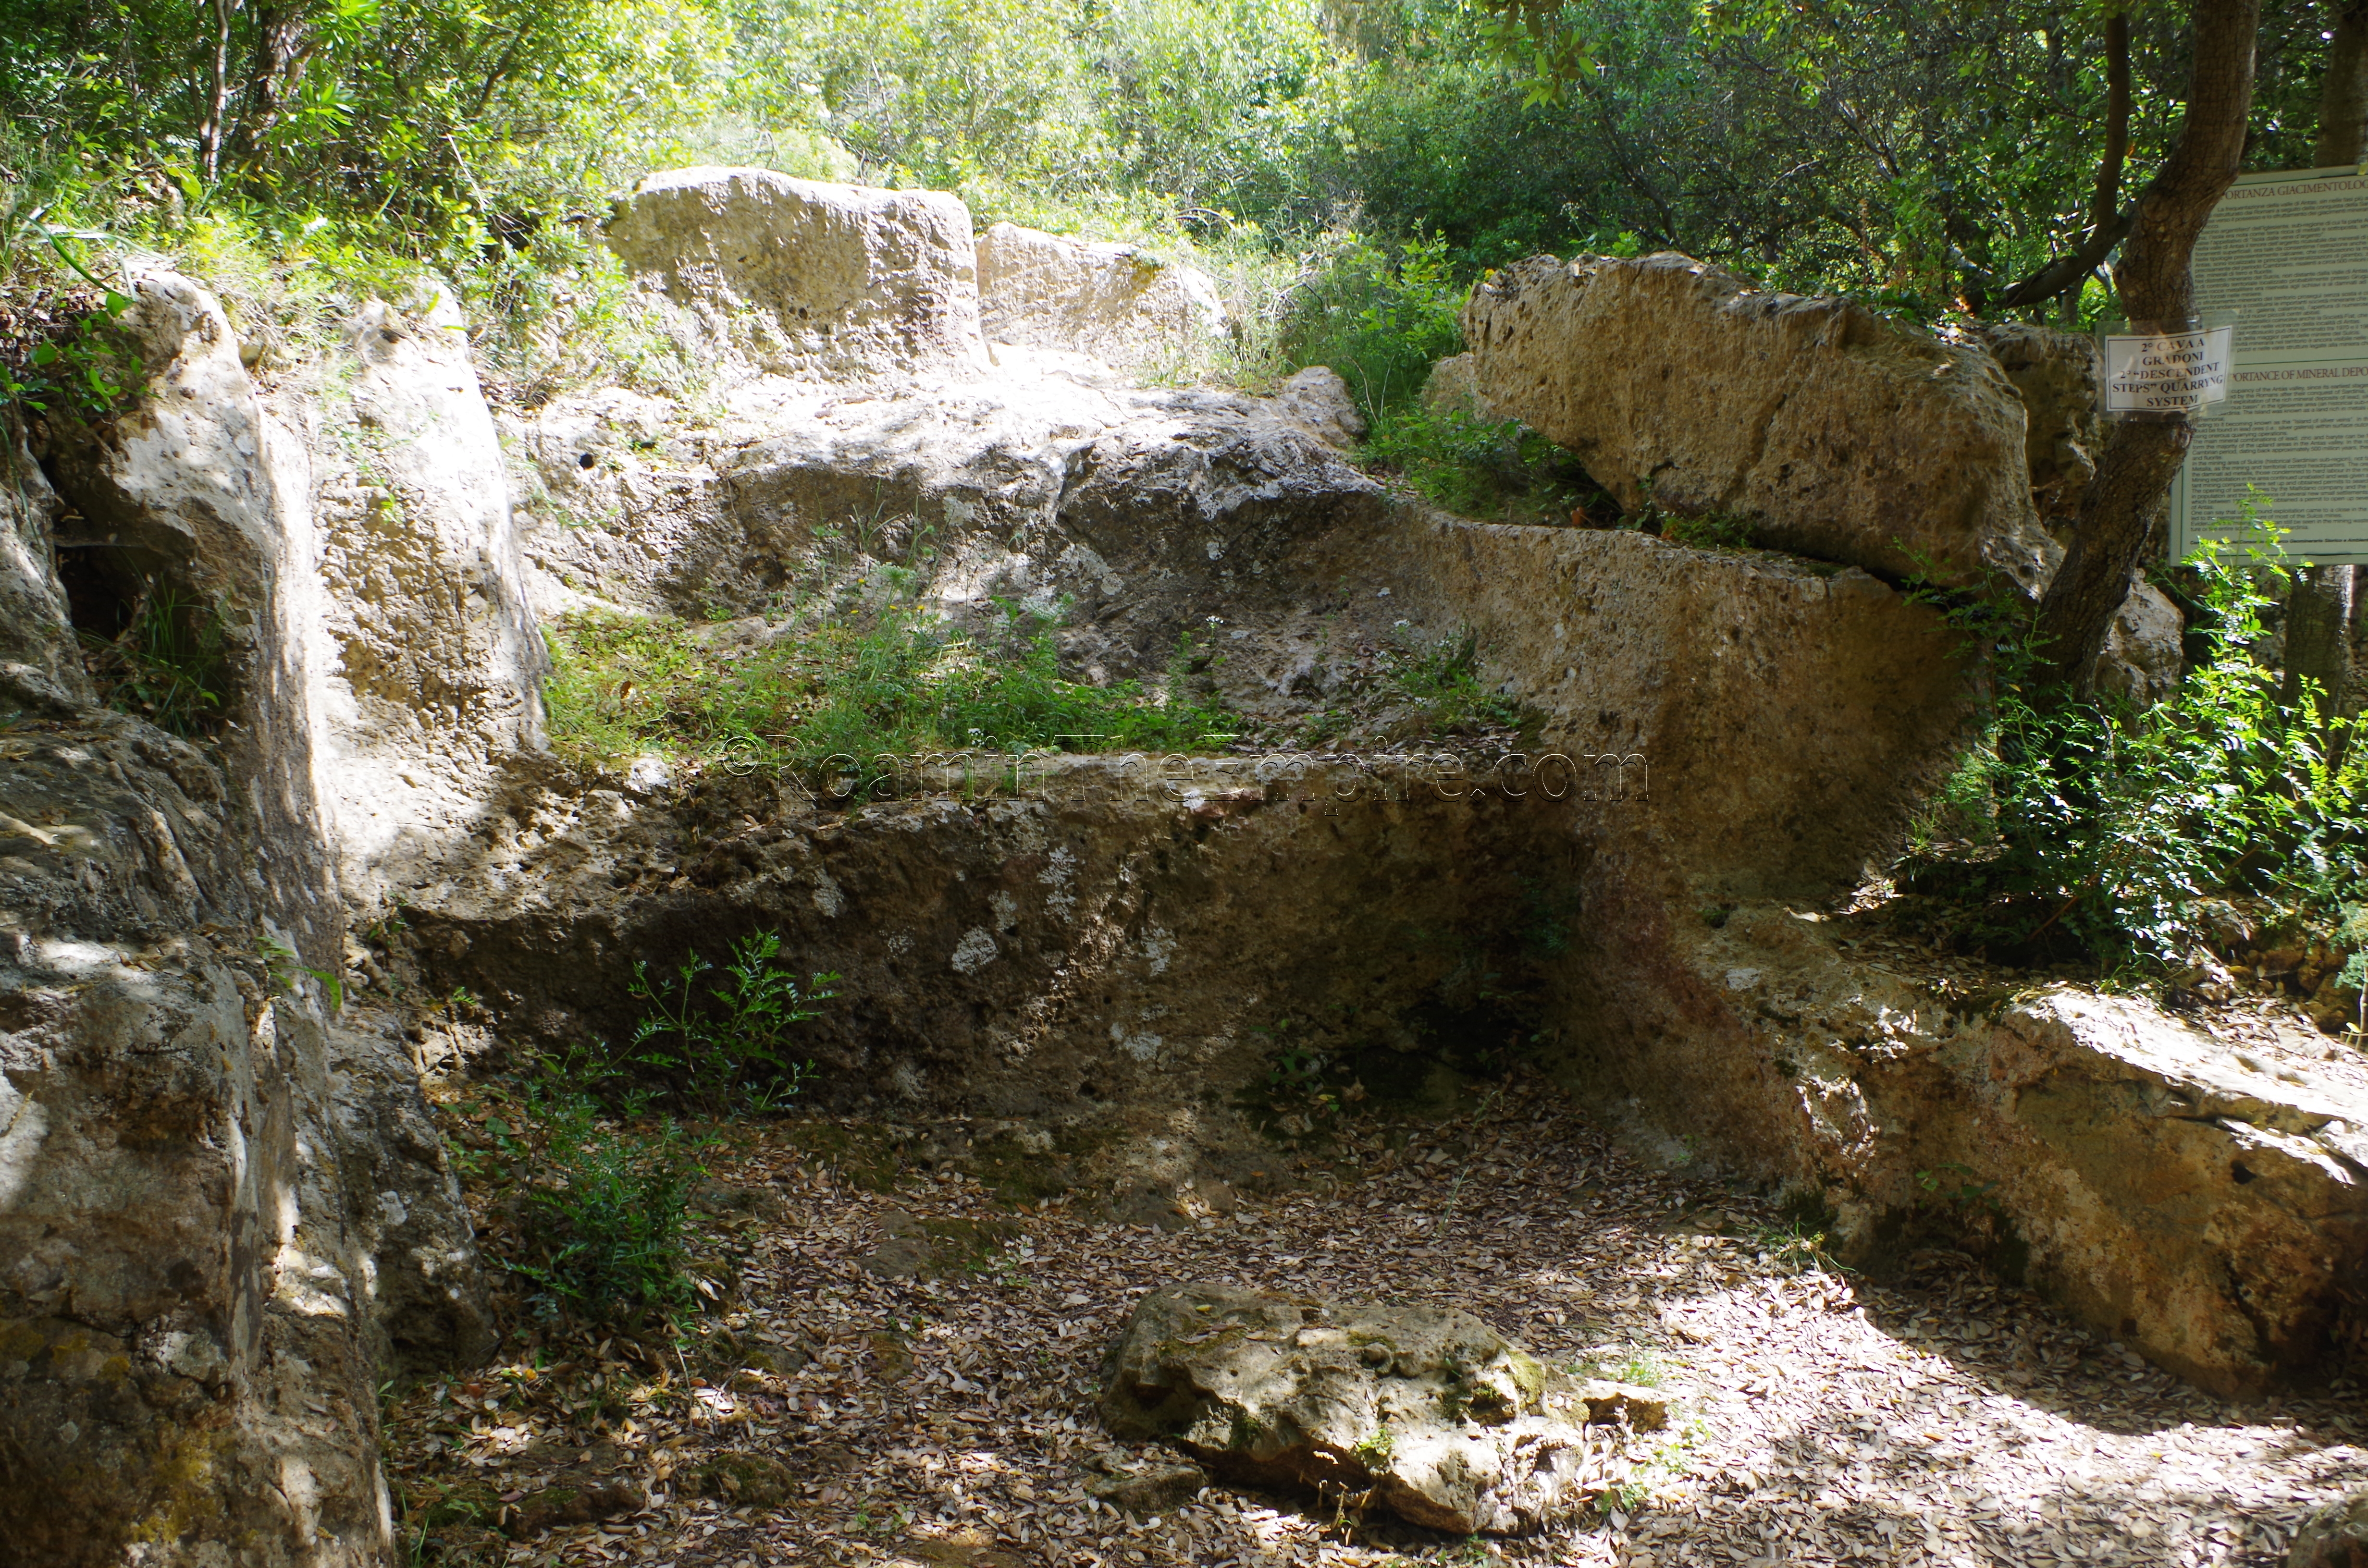 Second quarrying point (step quarrying) in the Temple of Antas quarries.